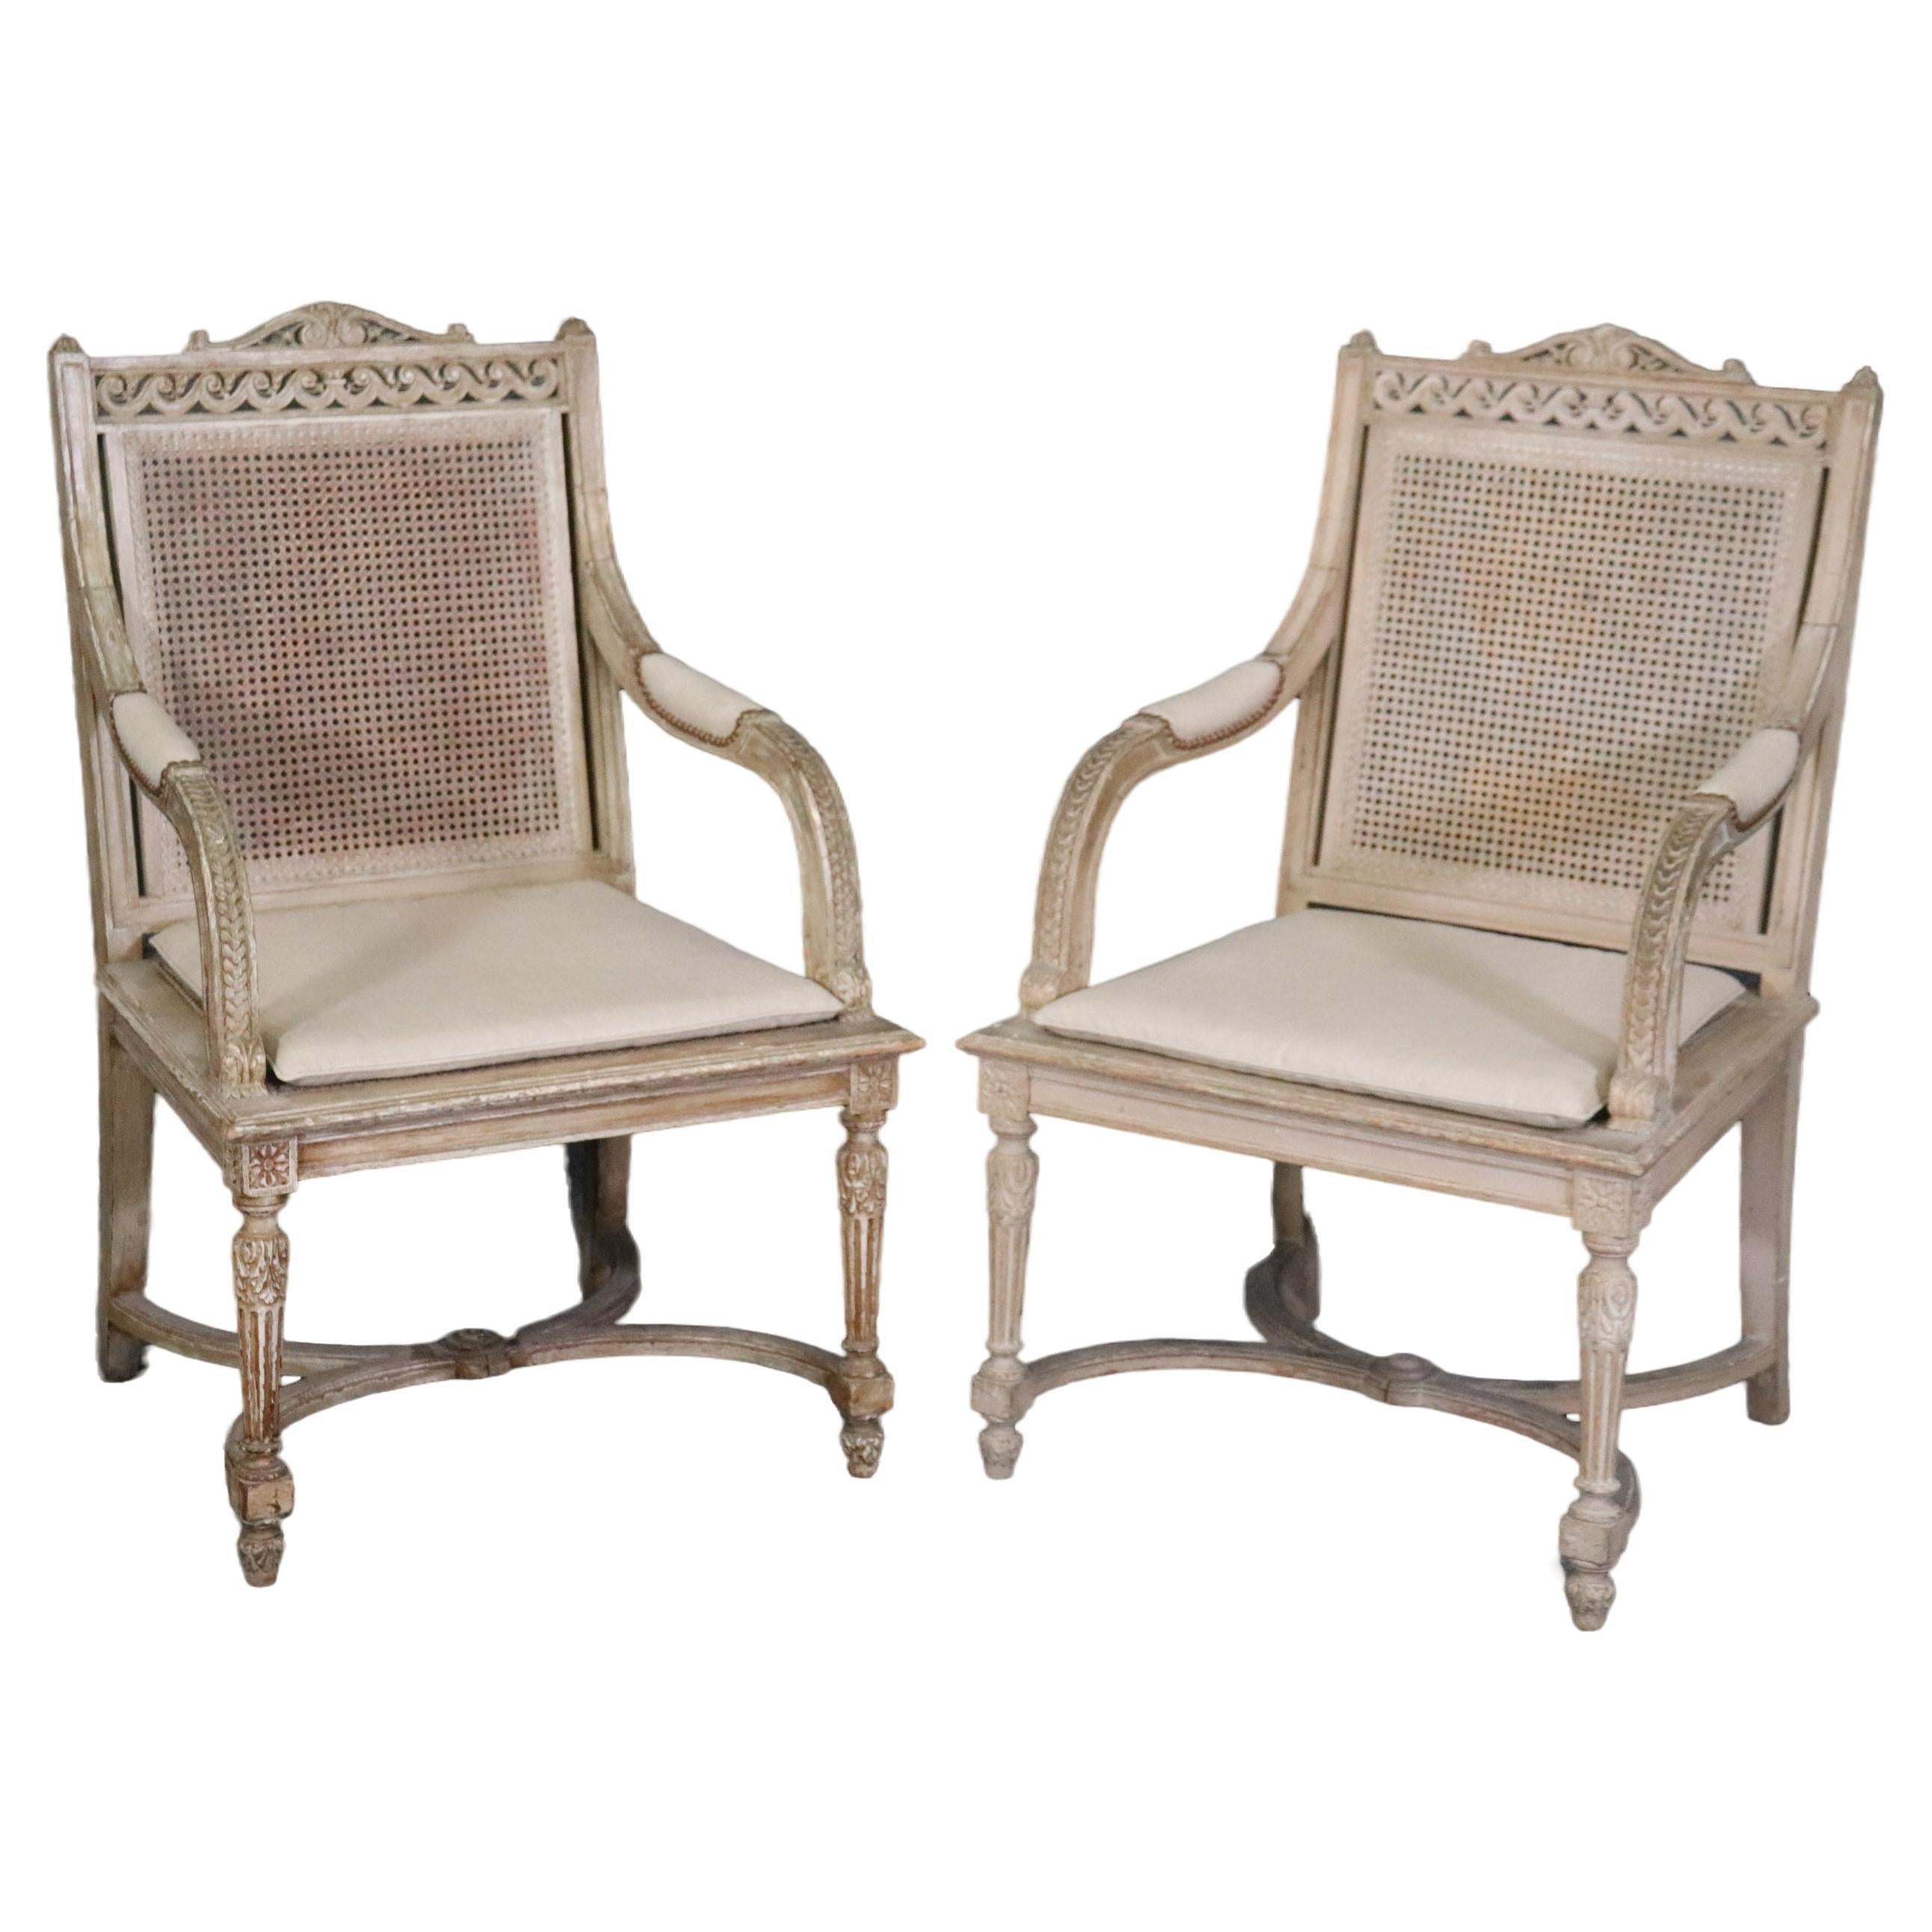   Pair of Cane Back Antique White Paint Decorated Louis XVI Style Armchairs Dini For Sale